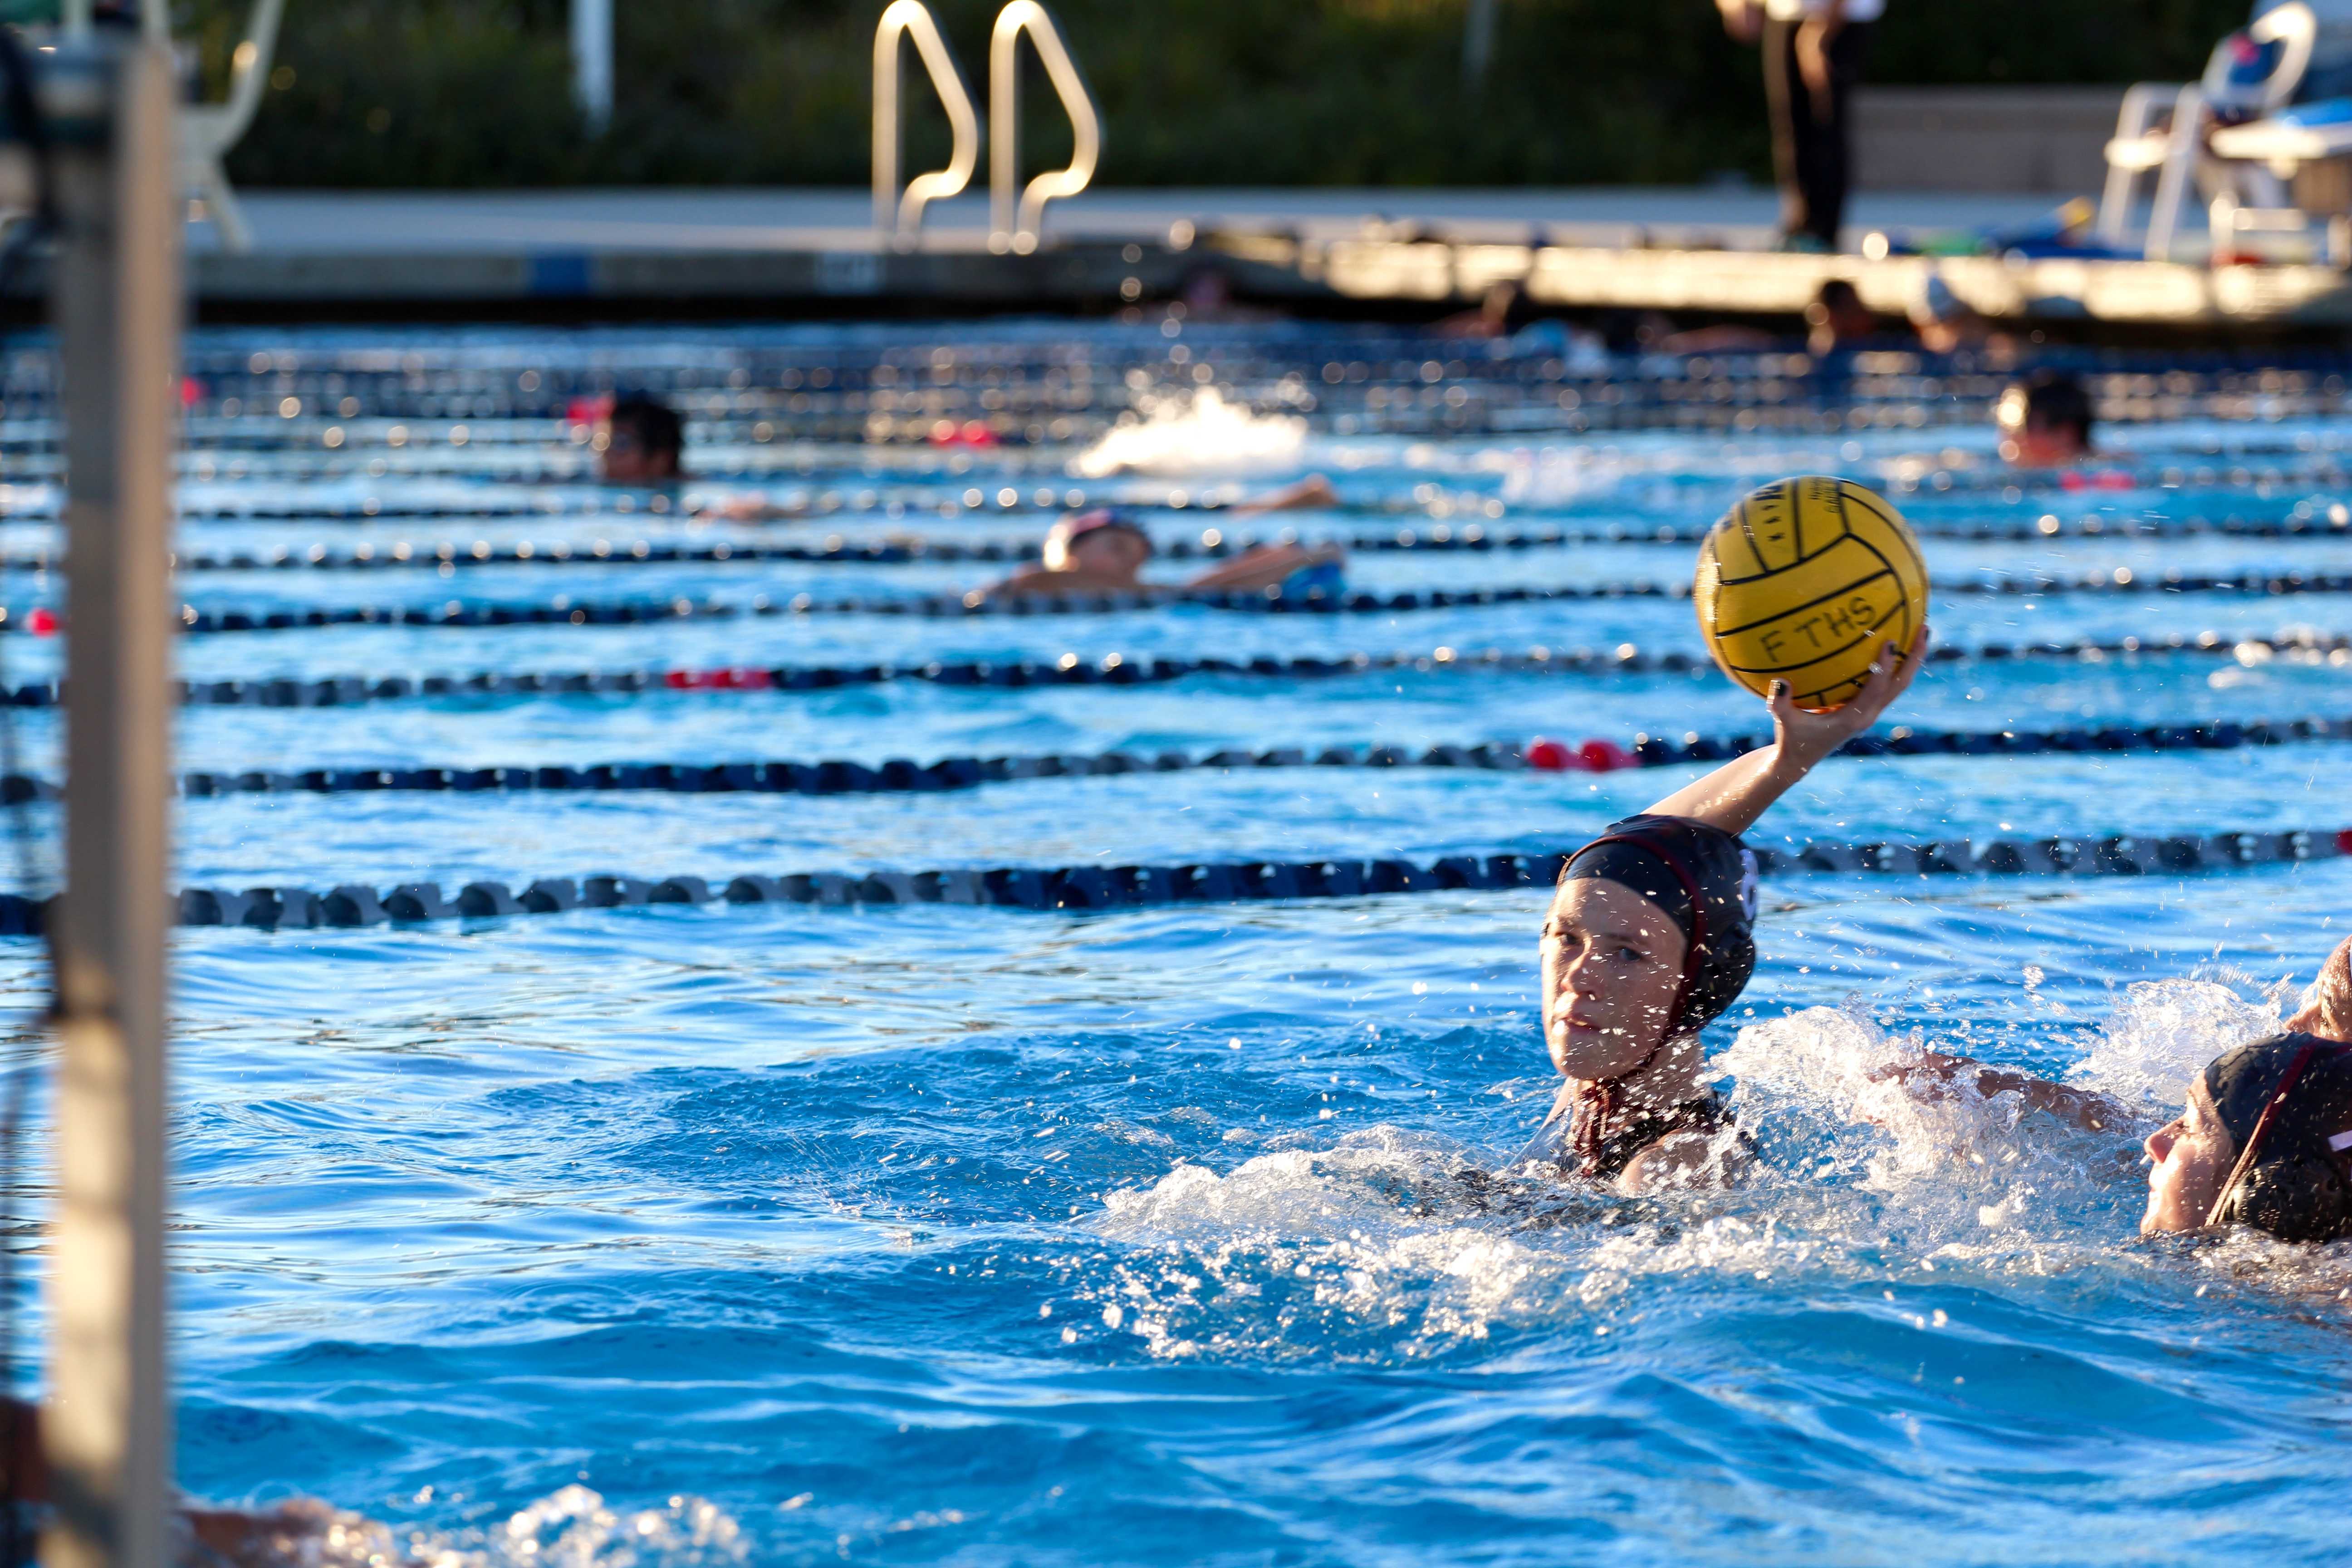 Foothill senior and co-team Captain  Annie Sinclair attempts to score a goal. Credit: Kazu Koba/The Foothill Dragon Press